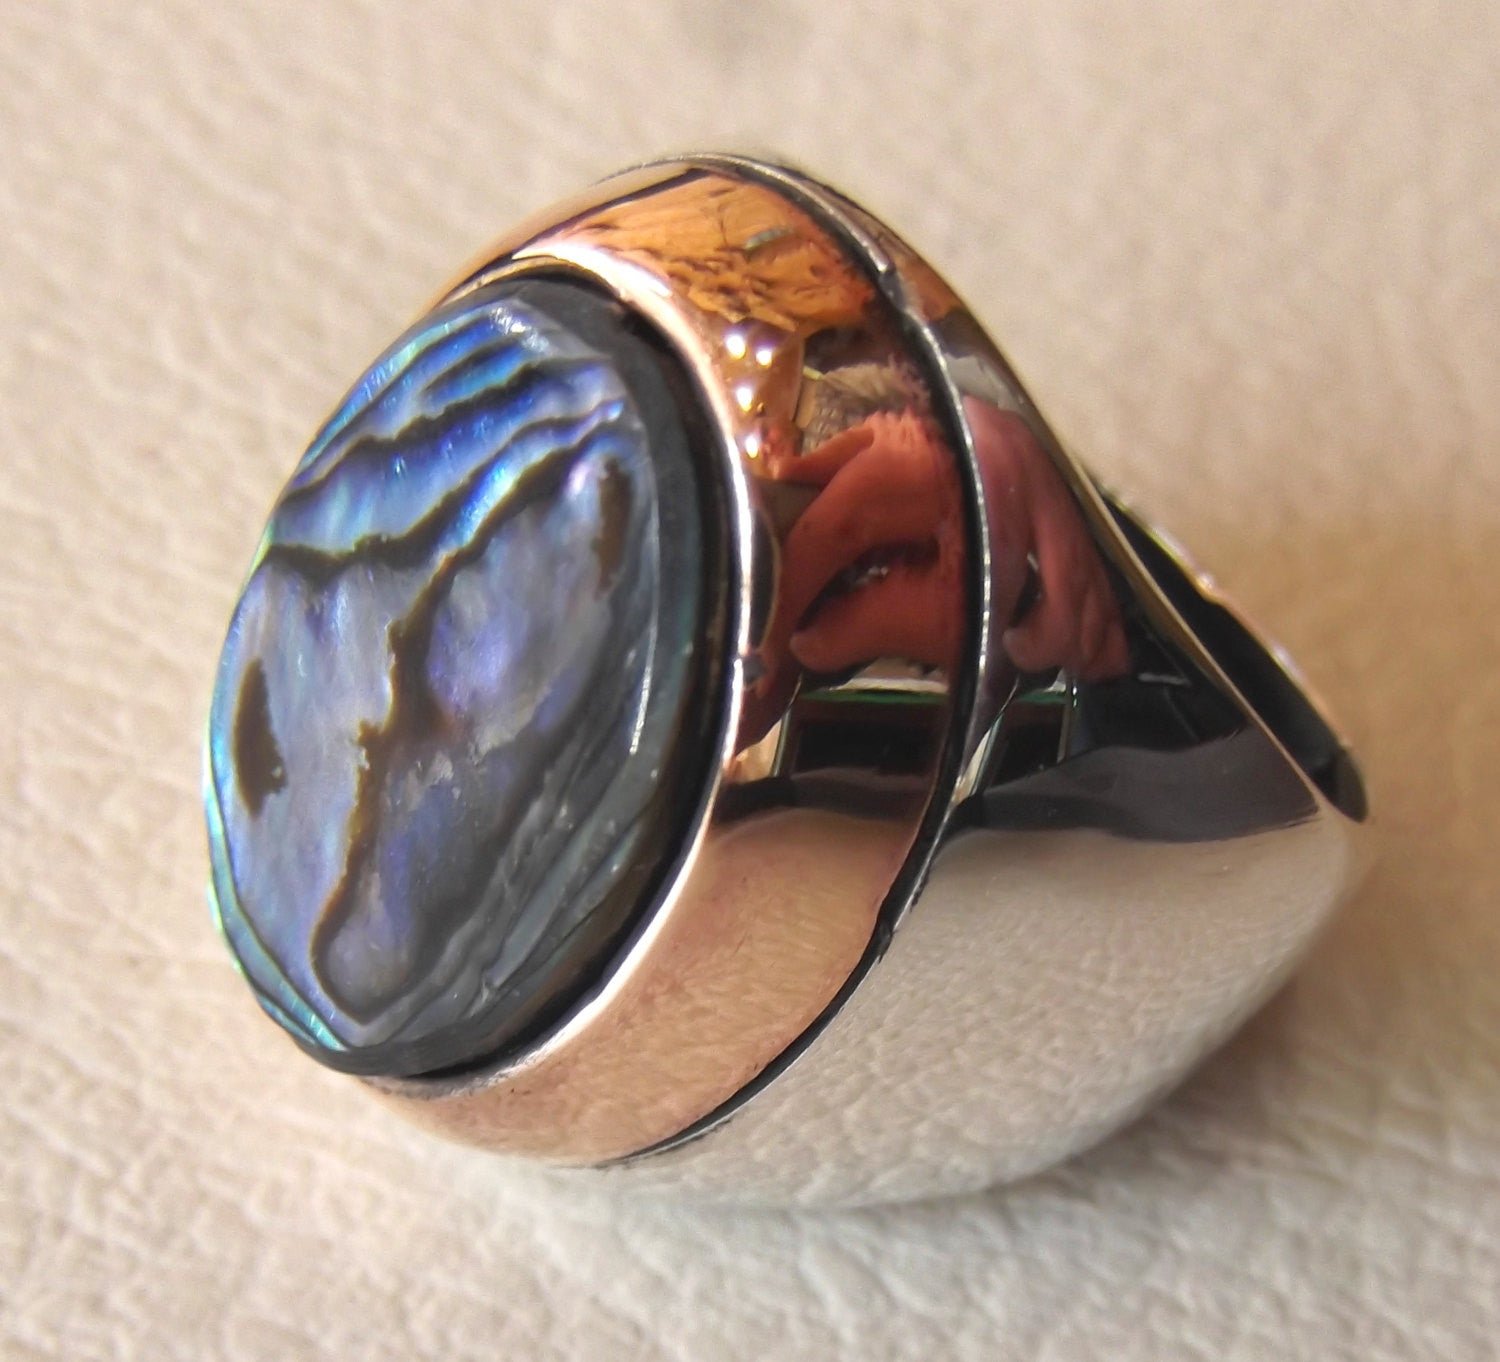 abalone shell multi color blue rainbow stone sterling silver 925 bronze frame men ring heavy huge all sizes fast shipping two tone jewelry